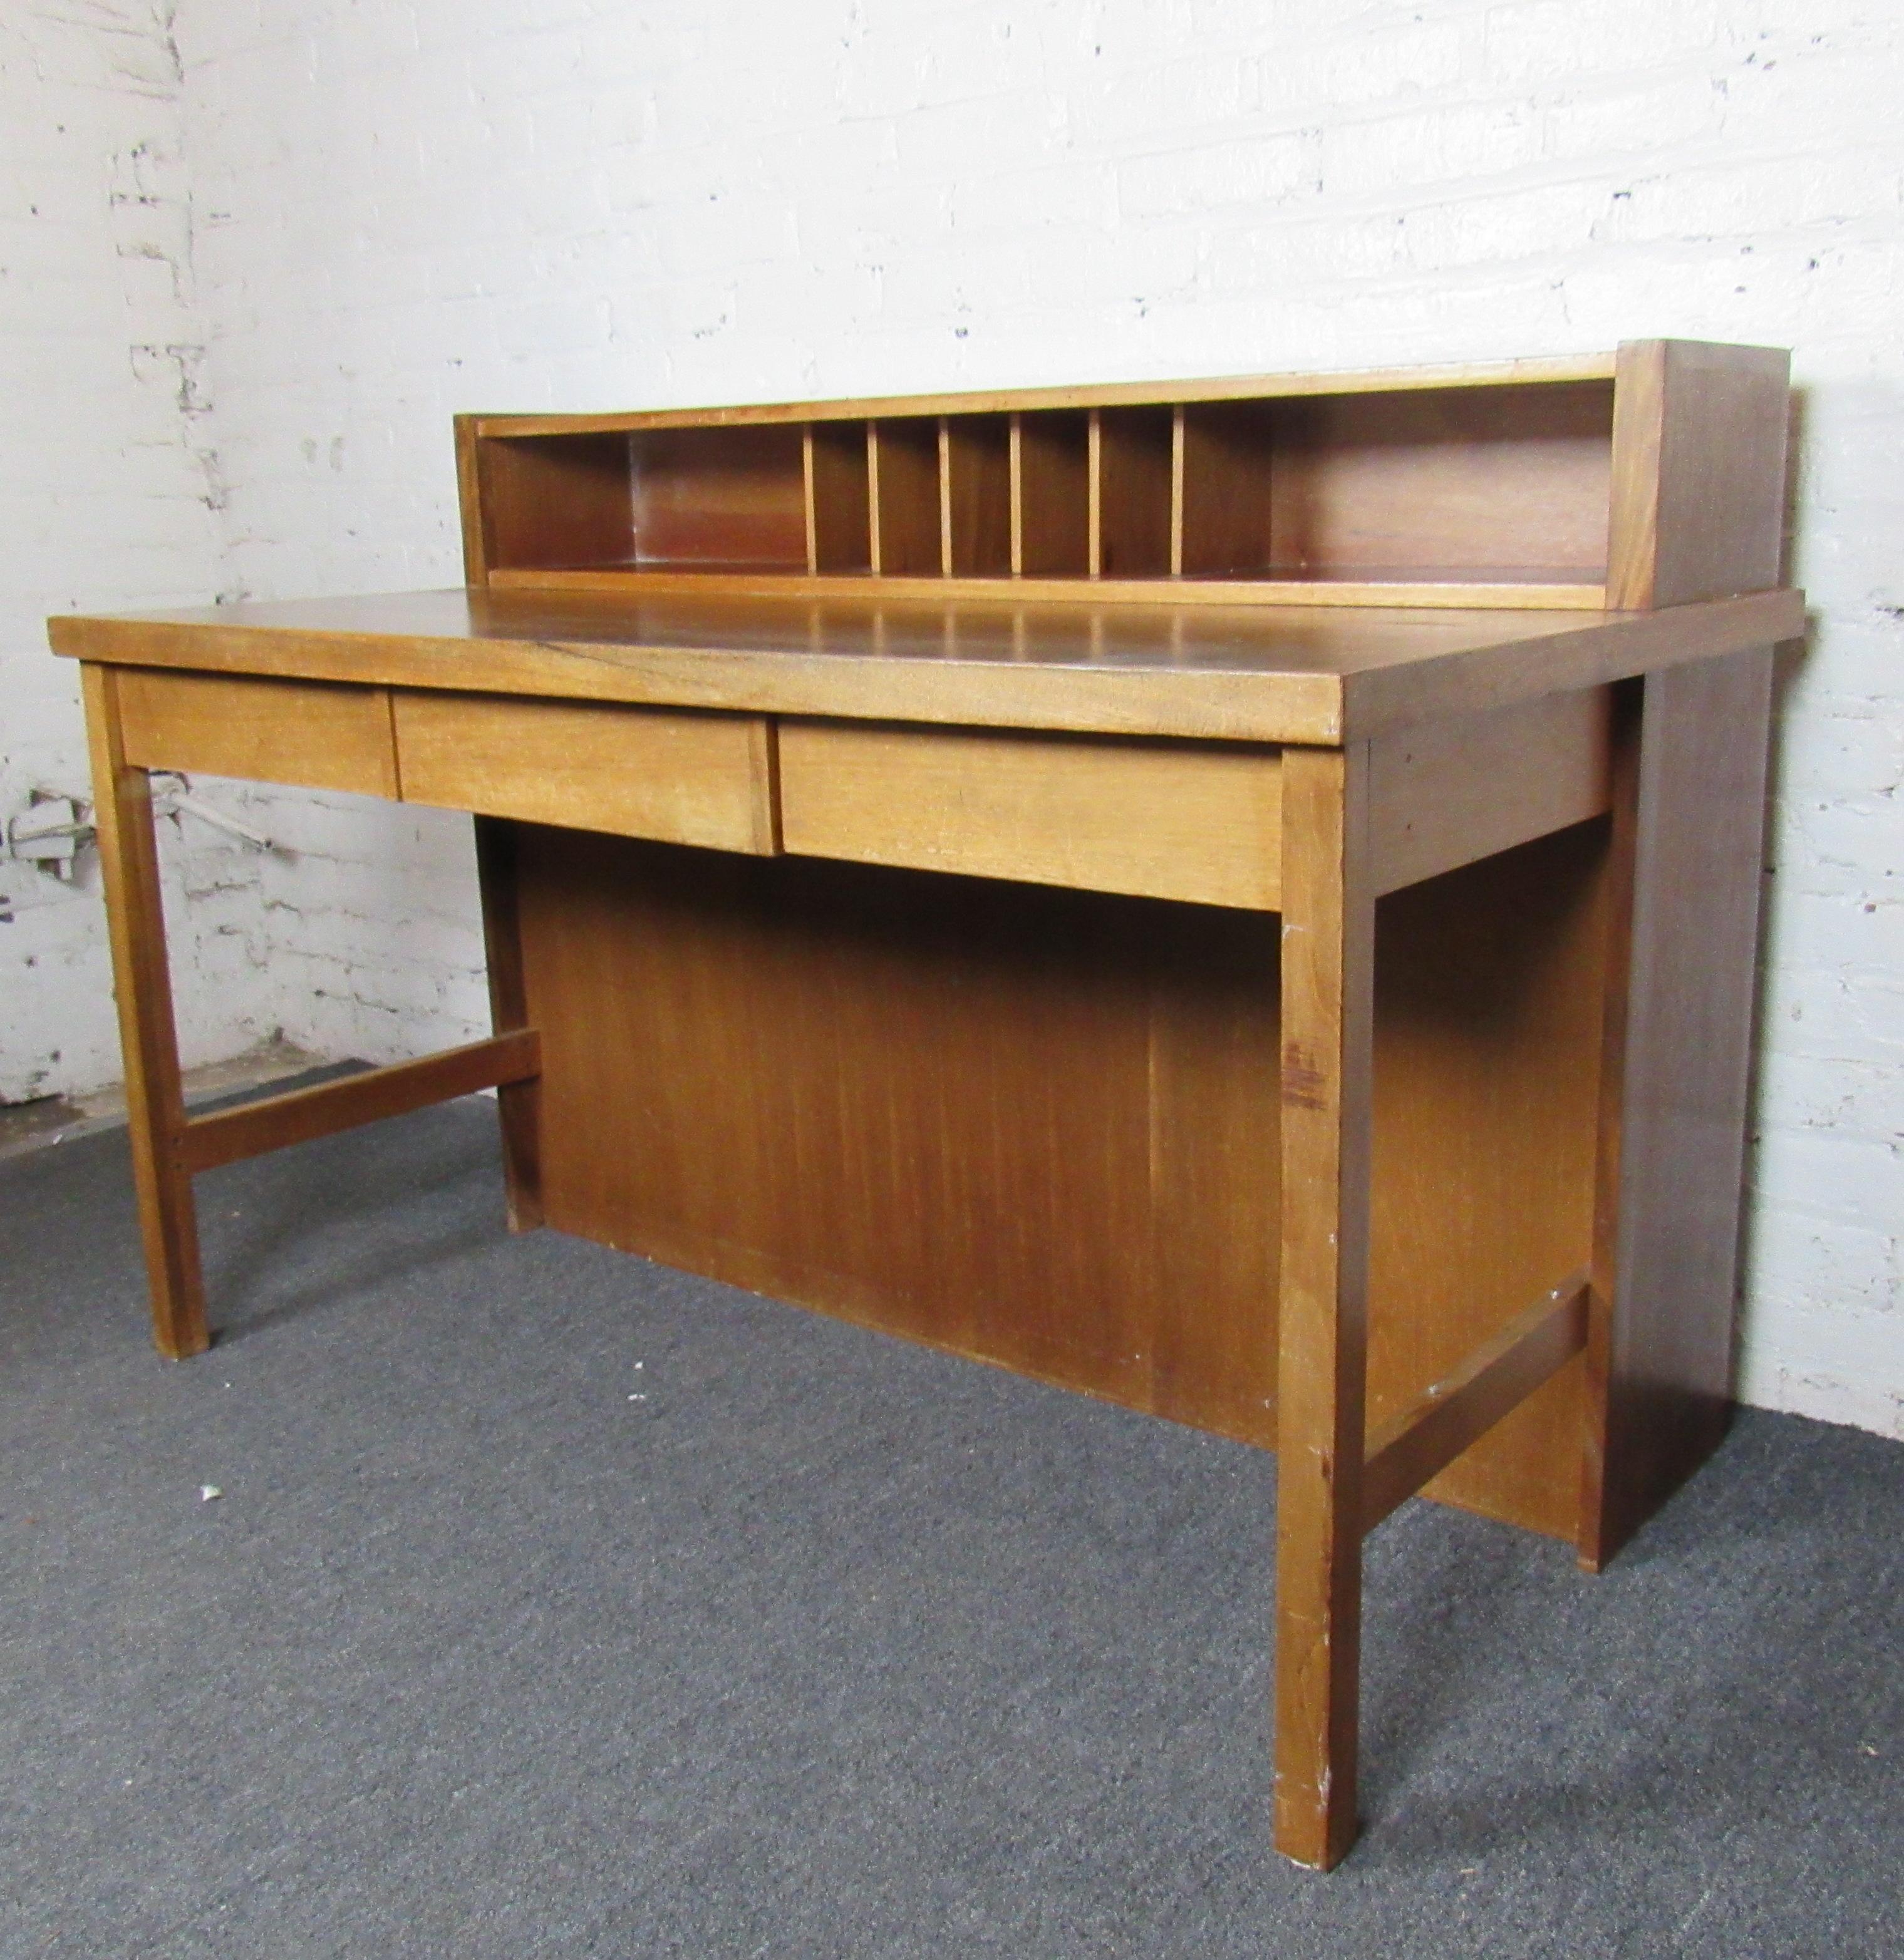 Perfect for any home office or study, this beautiful Mid-Century Modern desk shows off a rich woodgrain and sturdy construction. A small hutch and drawer allow for organization along with a large writing surface with plenty of space to work. Please